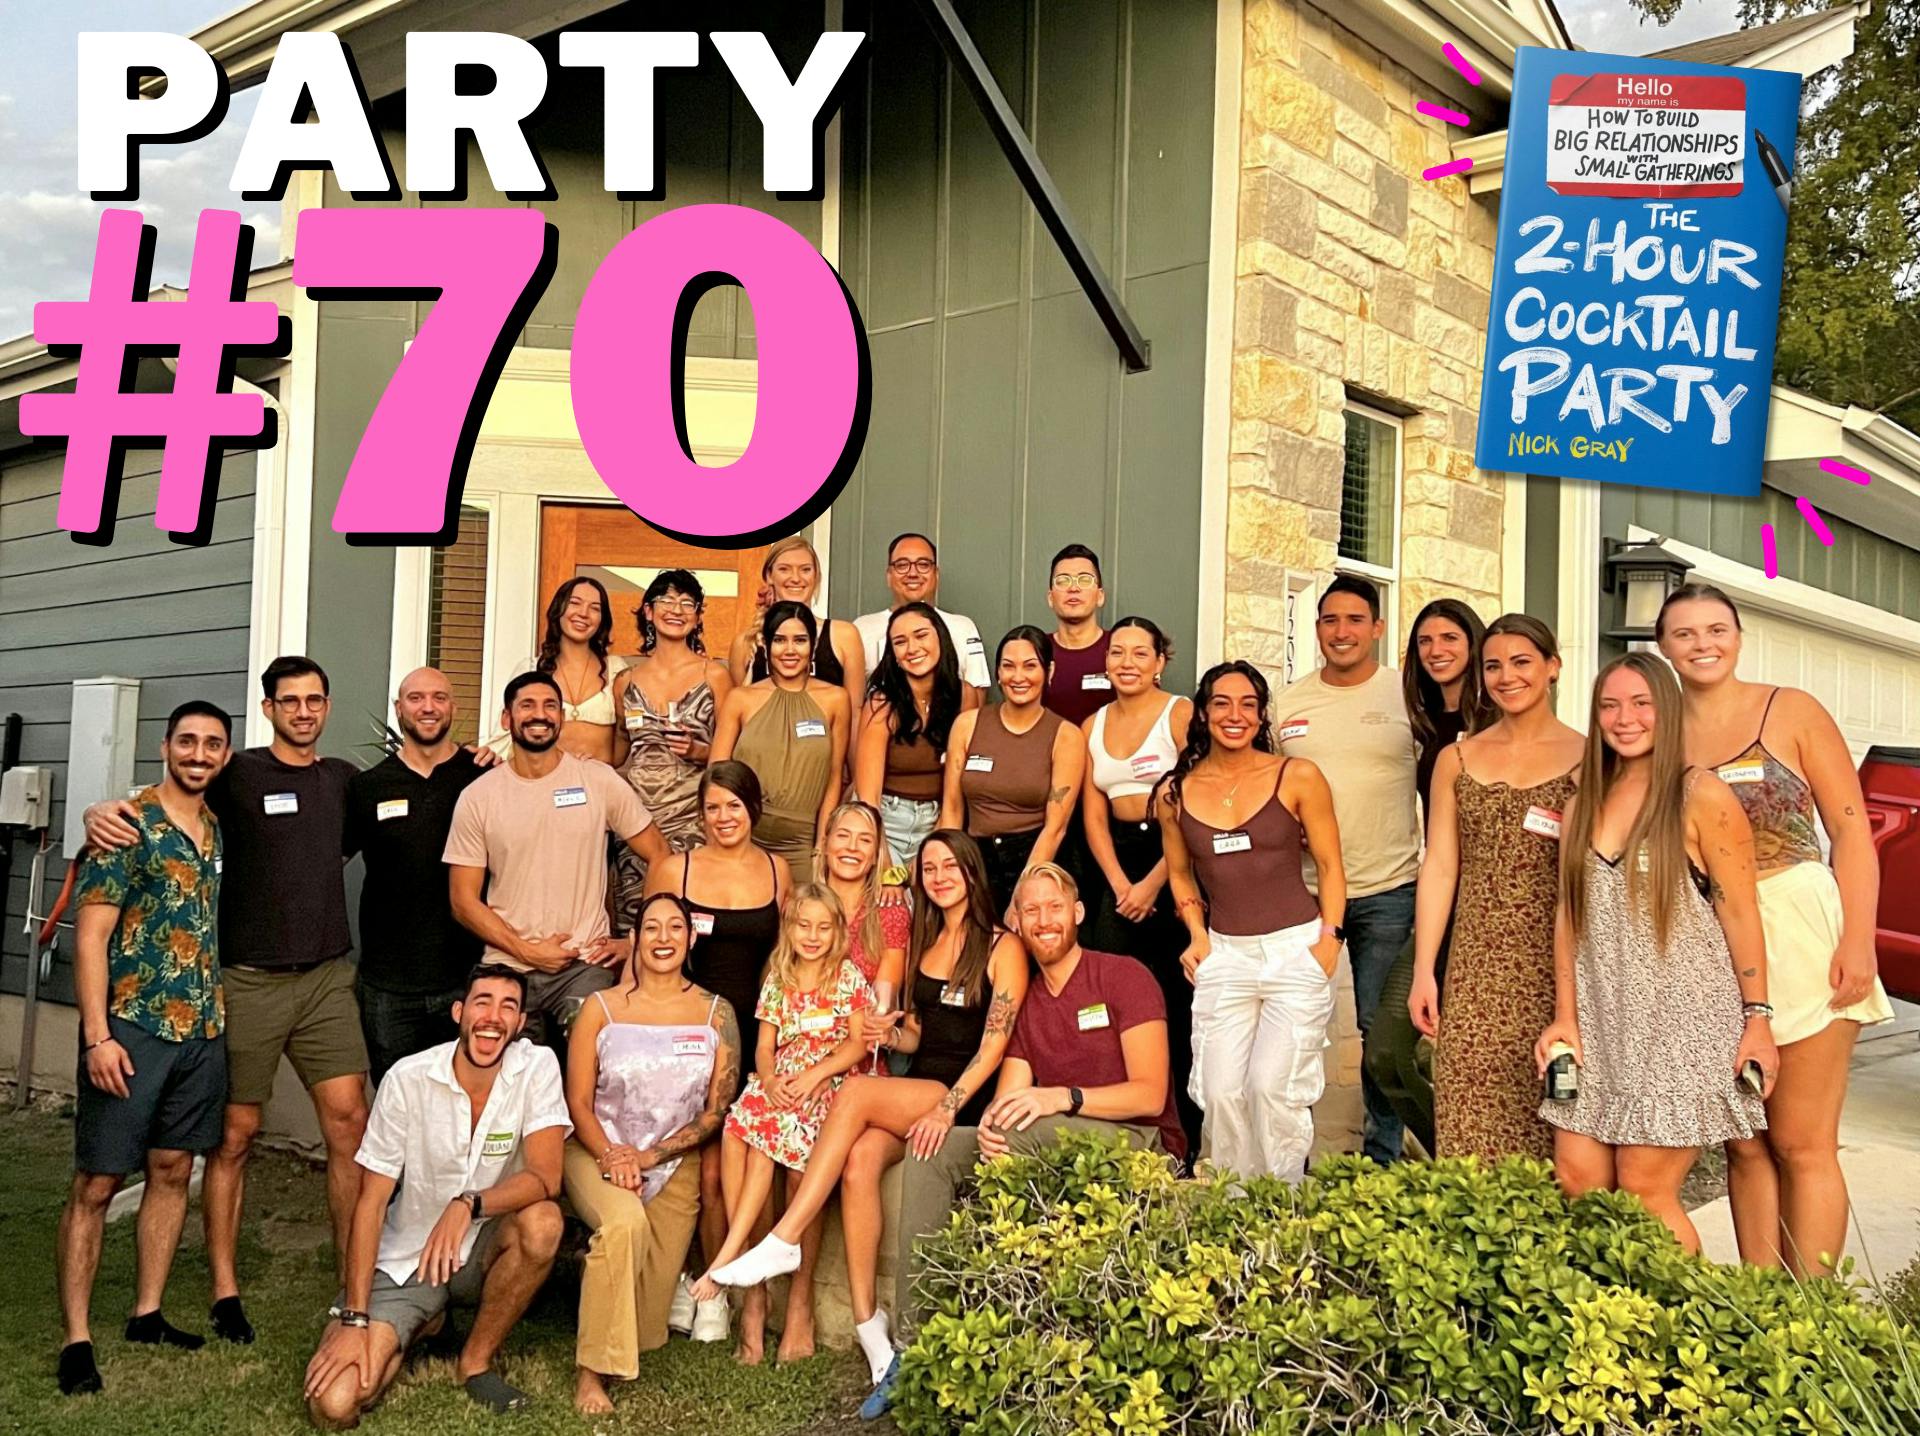 a group photo of Brigitte and her guests for her housewarming party with Party #70 text